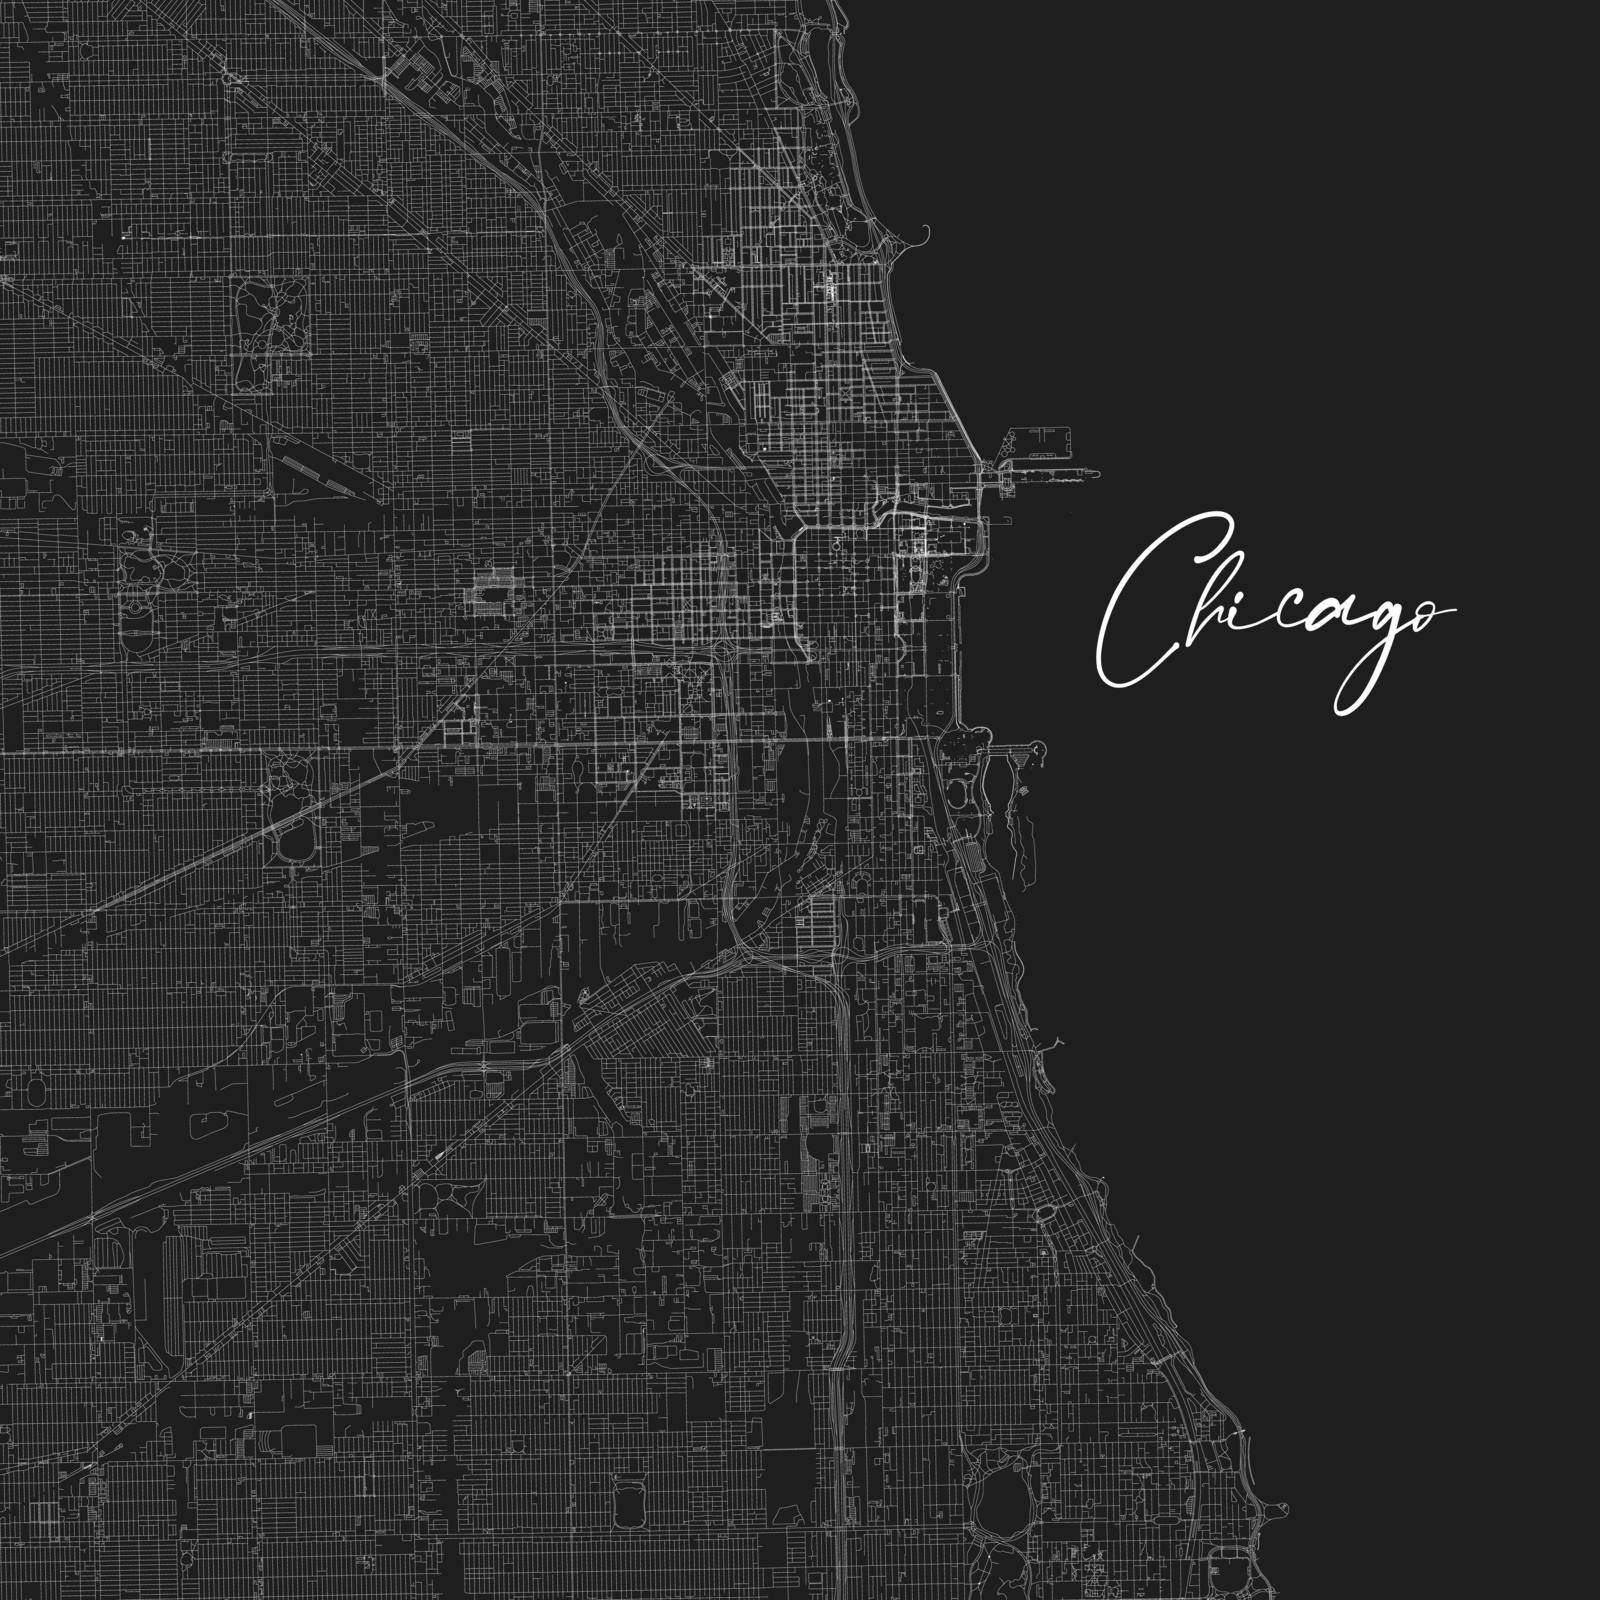 Chicago, Illinois. Downtown vector map. City name on a separate layer. Art print template. Black and white.